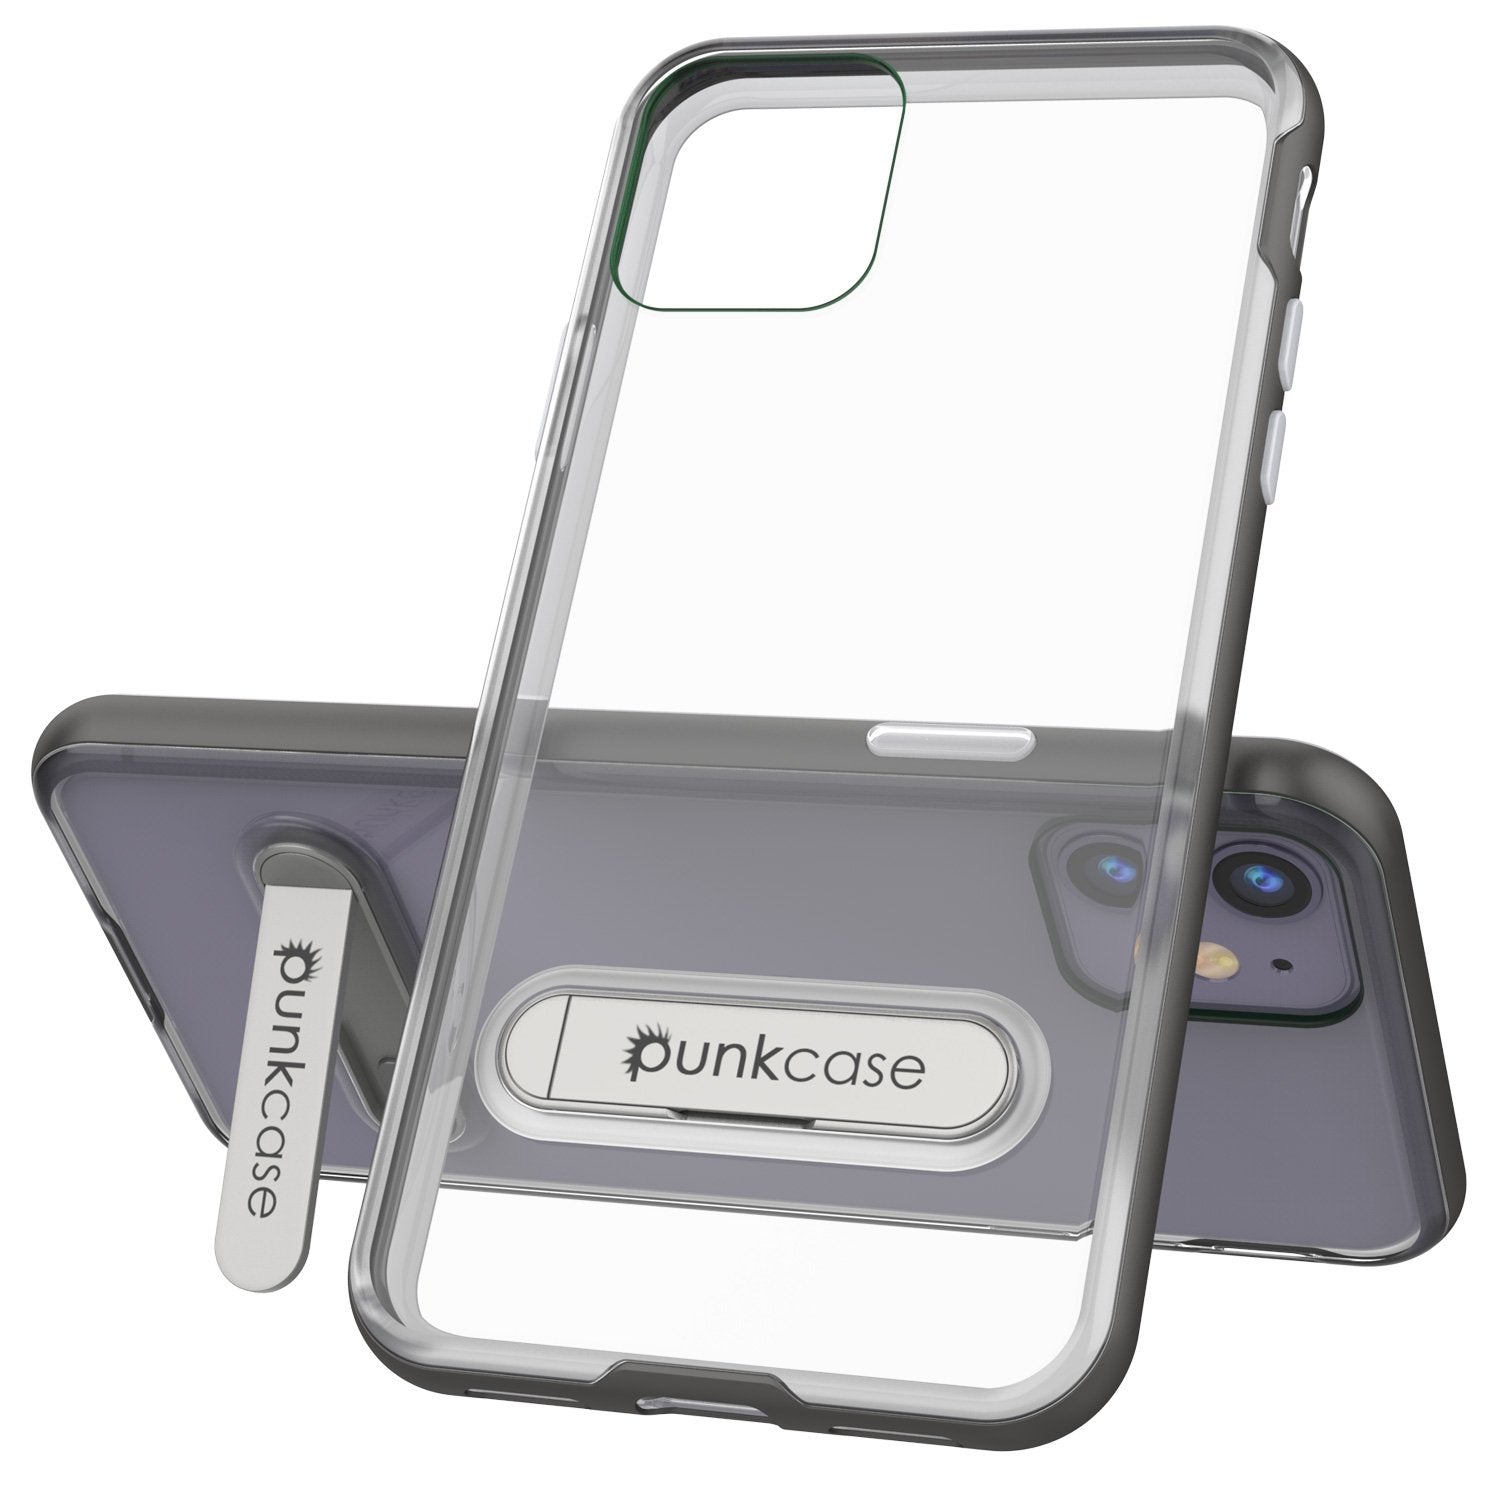 iPhone 11 Case, PUNKcase [LUCID 3.0 Series] [Slim Fit] Armor Cover w/ Integrated Screen Protector [Grey]